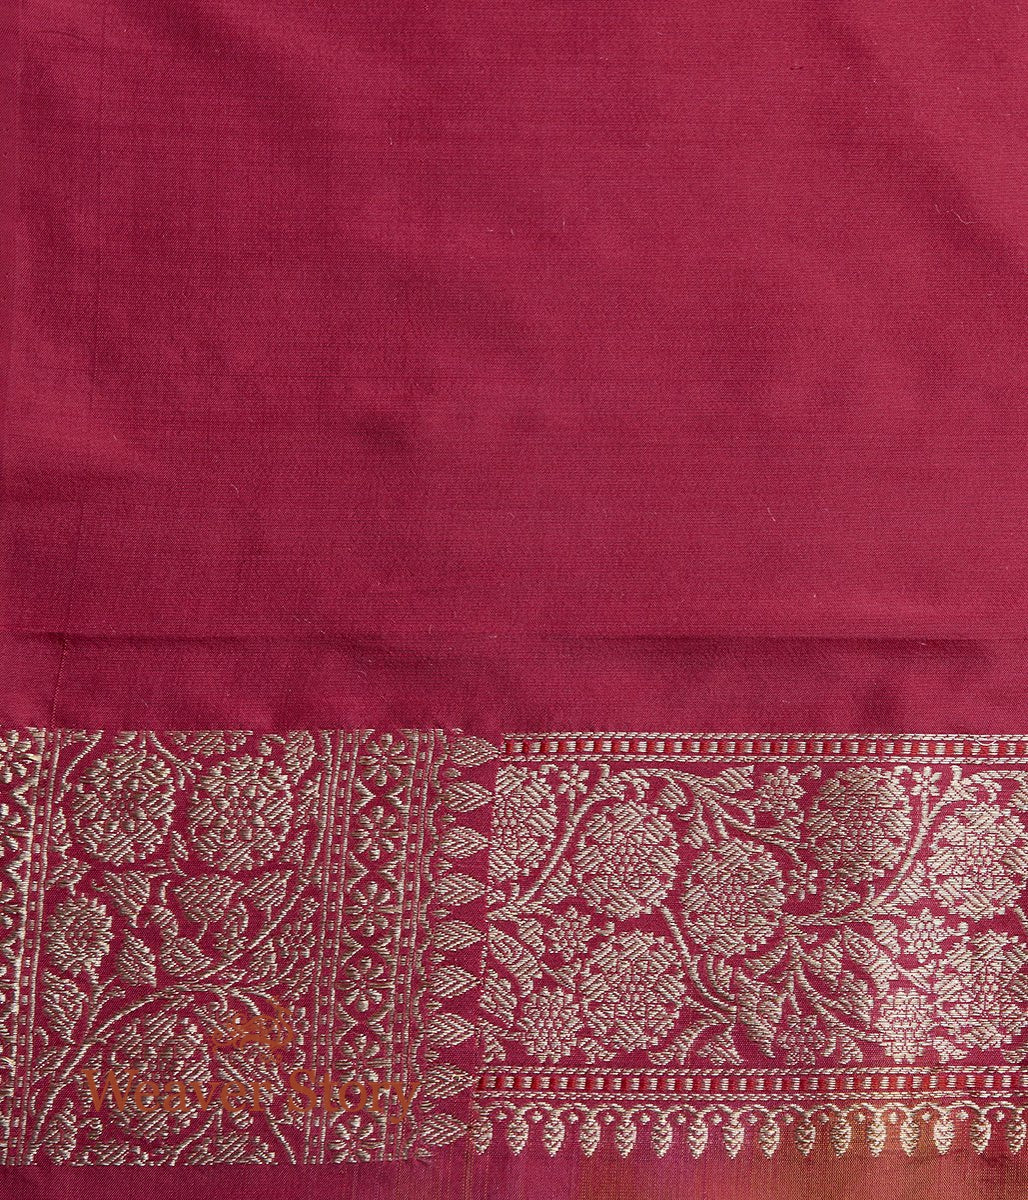 Handwoven_Yellow_and_Gold_Zari_Tanchoi_Saree_with_Pink_Selvedge_WeaverStory_05